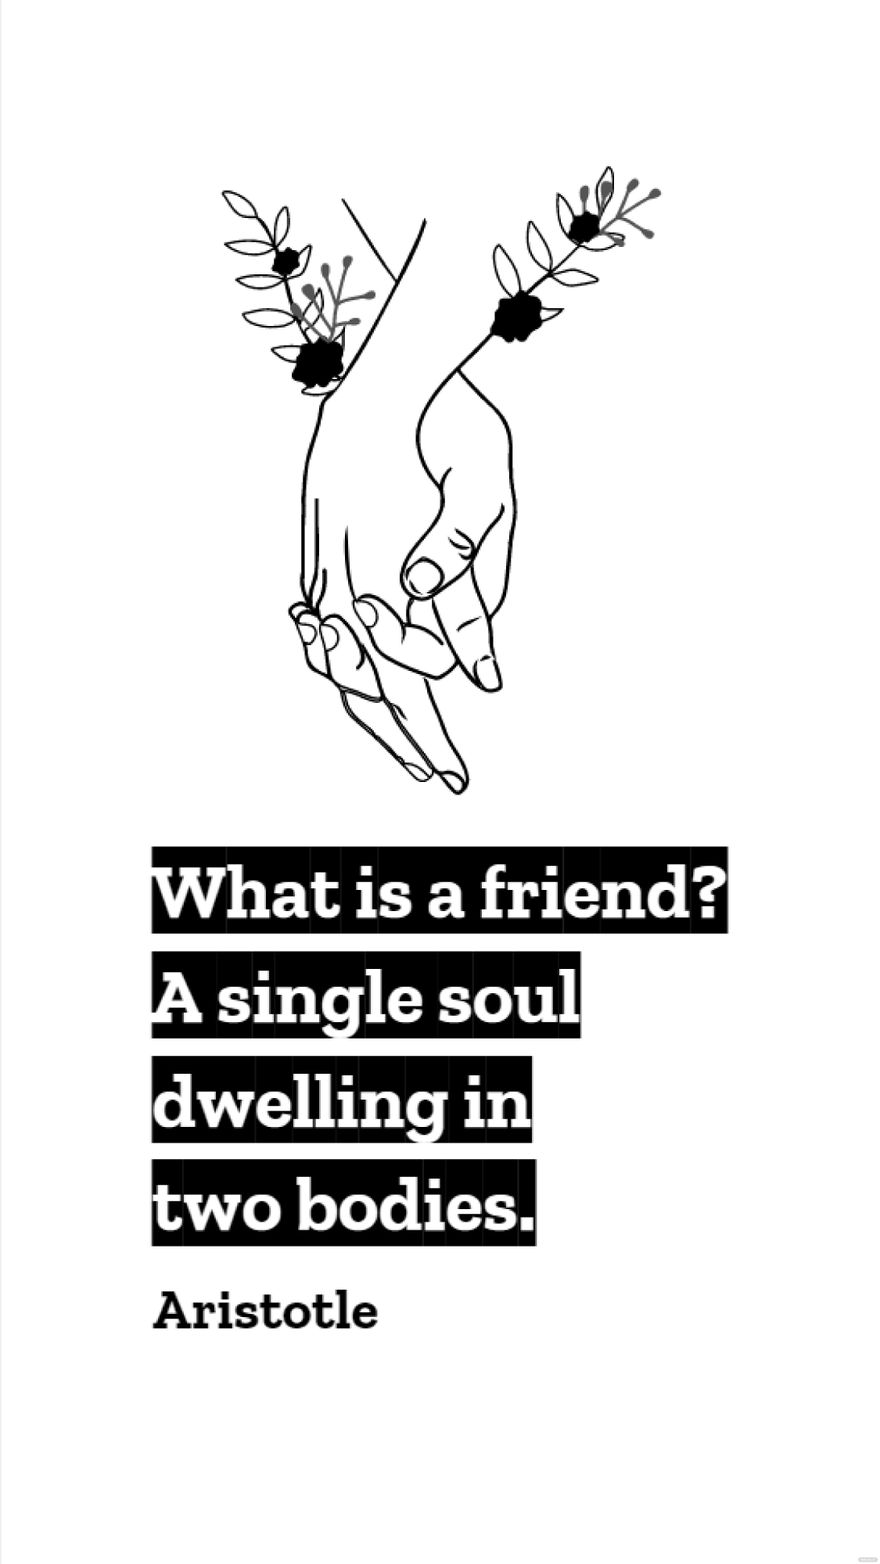 Aristotle - What is a friend? A single soul dwelling in two bodies.